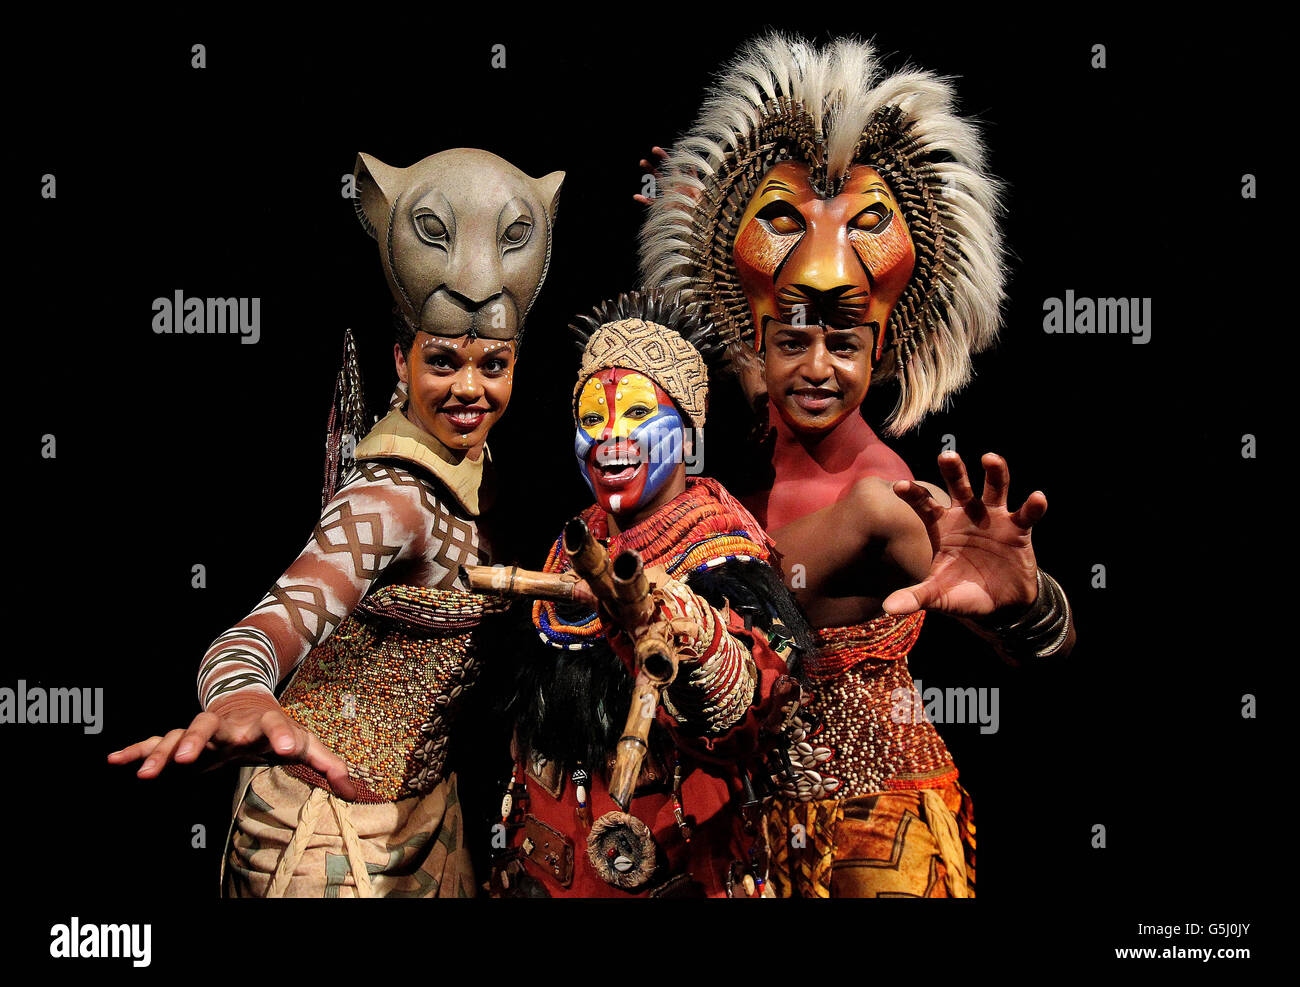 L-R Melina M'Poy (Nala) Gugwana Dlamini (Rafiki) and Johnathan Andrew Hume as (Simba) pictured at the launch of The Lion King musical at the Project arts centre in Dublin. Stock Photo